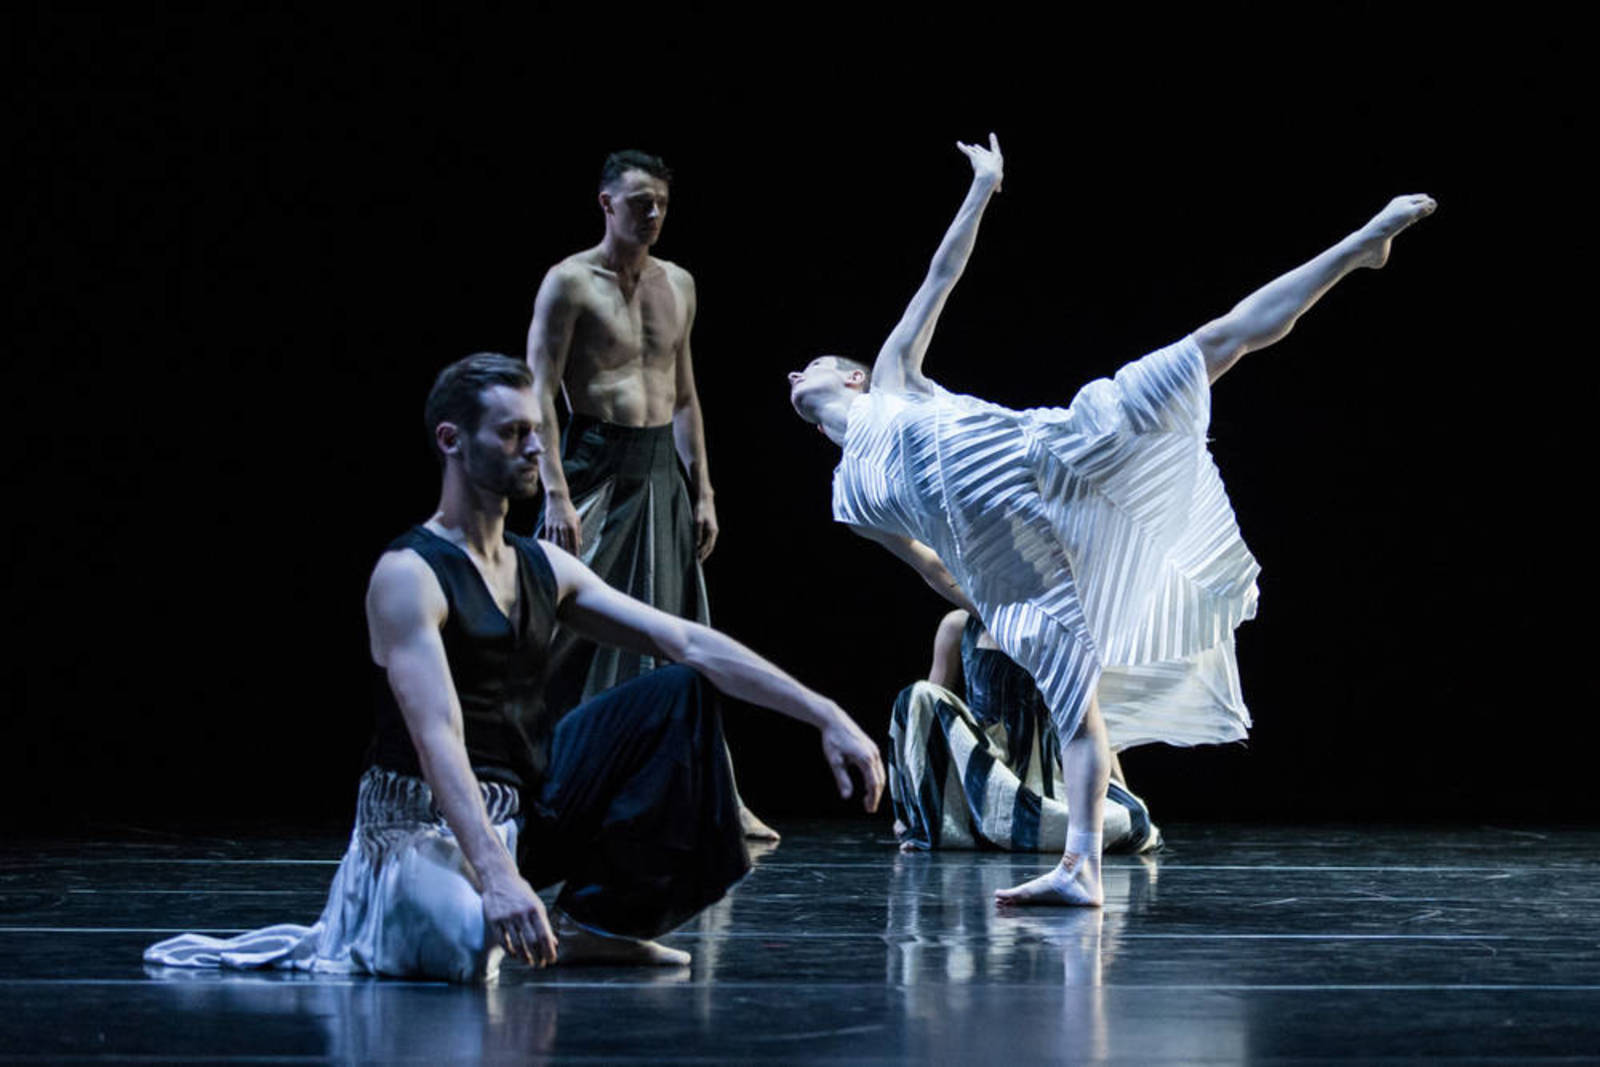 Sydney Dance Company’s Premiere in Kaohsiung The First Performance of Lux Tenebris and Full Moon in Asia